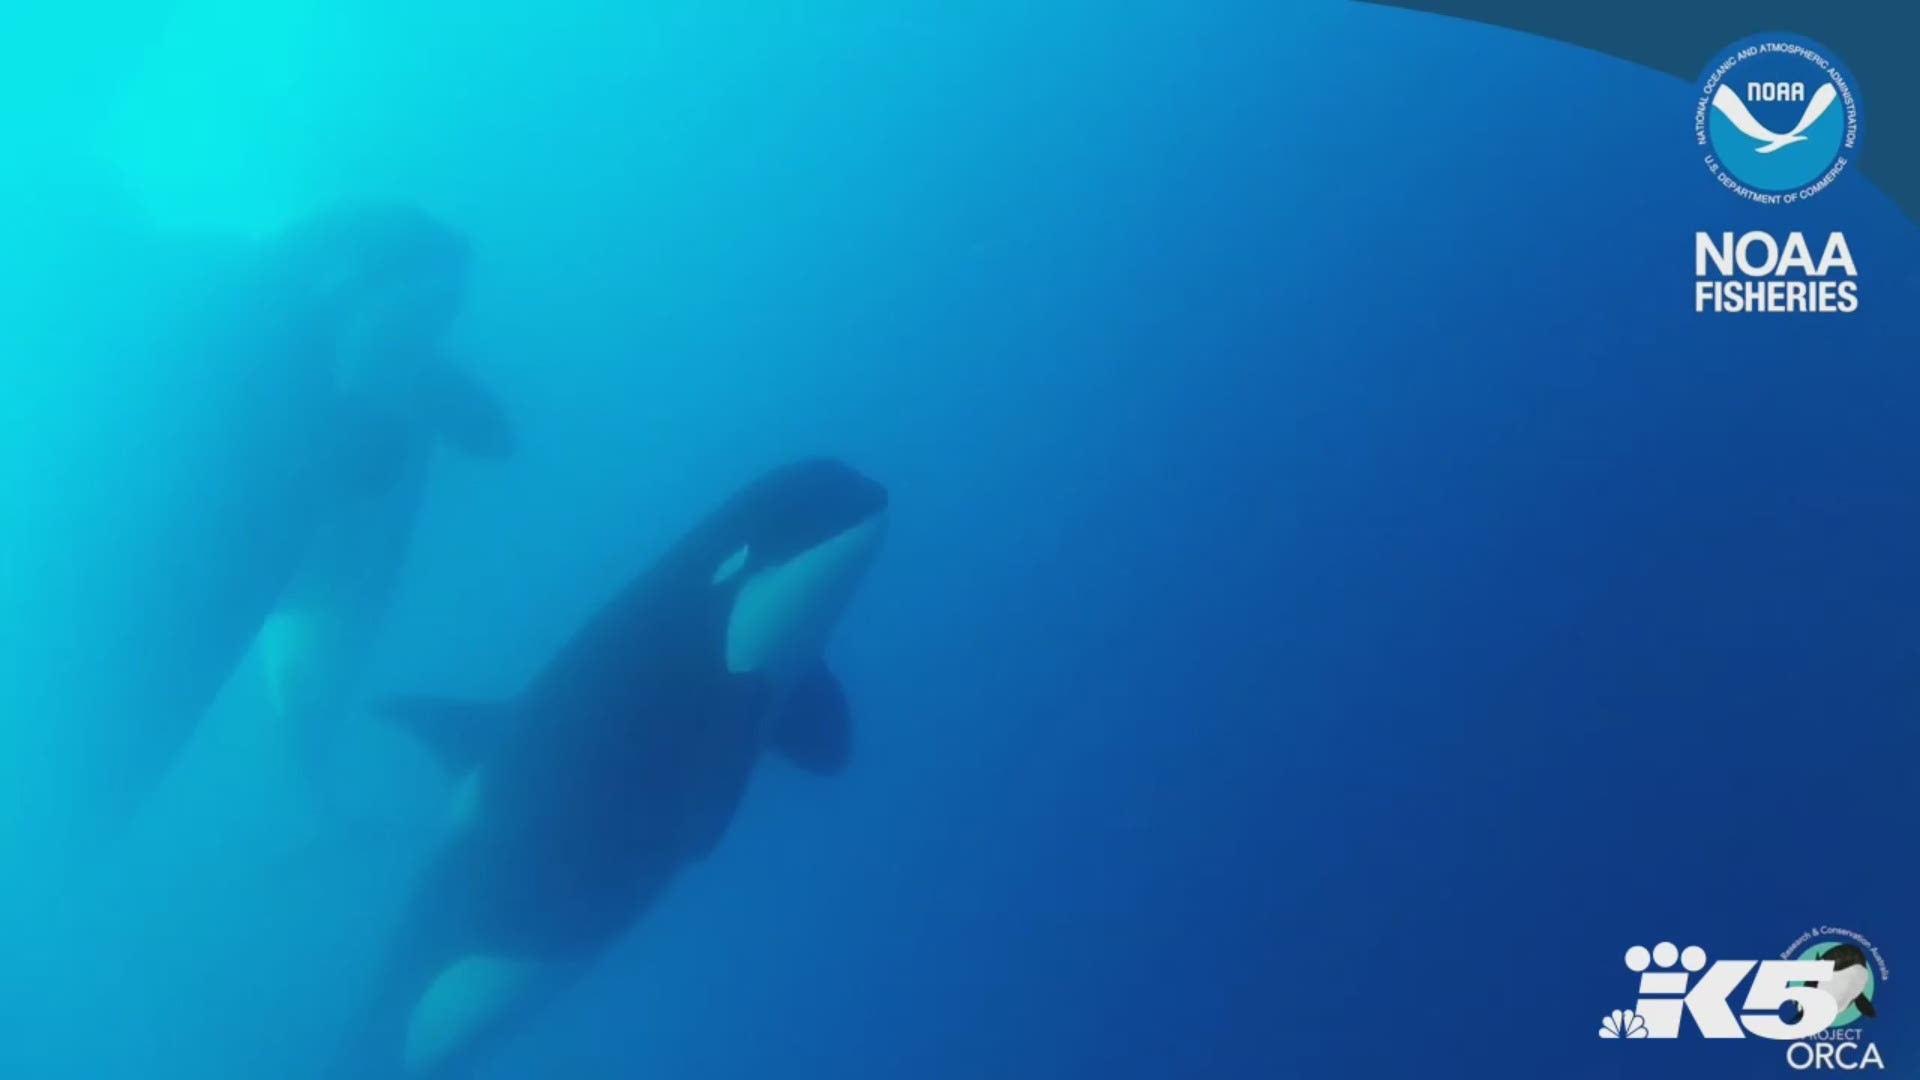 Scientist found a new type of killer whale off the coast of Chile.